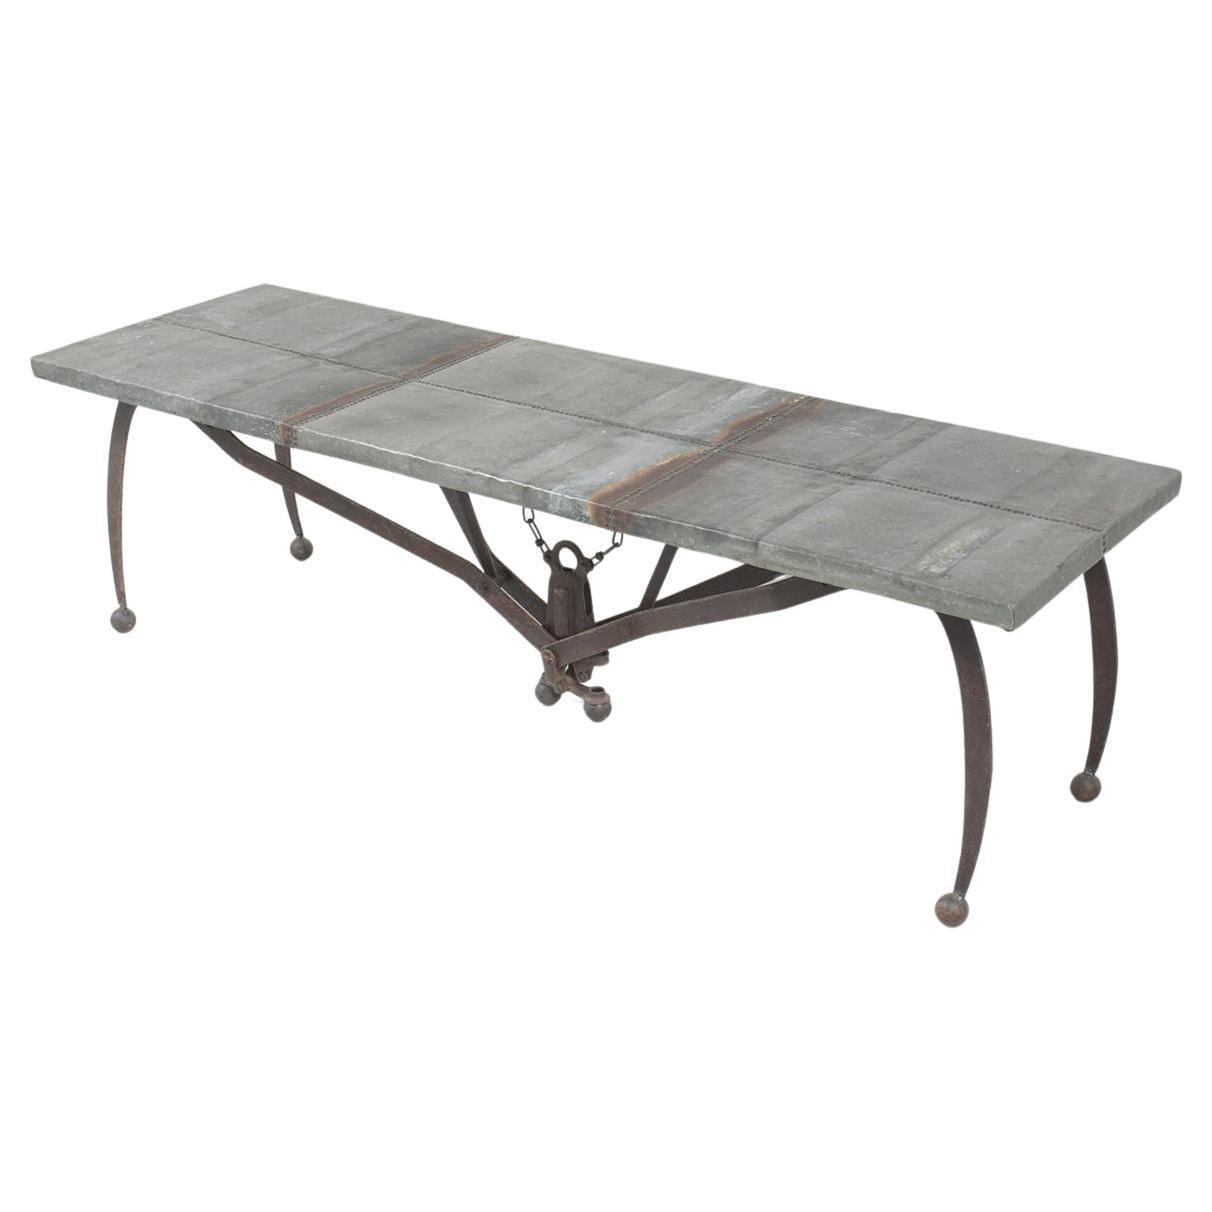 This vintage wrought iron coffee table is handcrafted out of wrought iron, reclaimed wood, and tin combination and has been newly restored by our professional team of expert craftsmen. The 1980s table top is made out of wood covered in a tin sheet